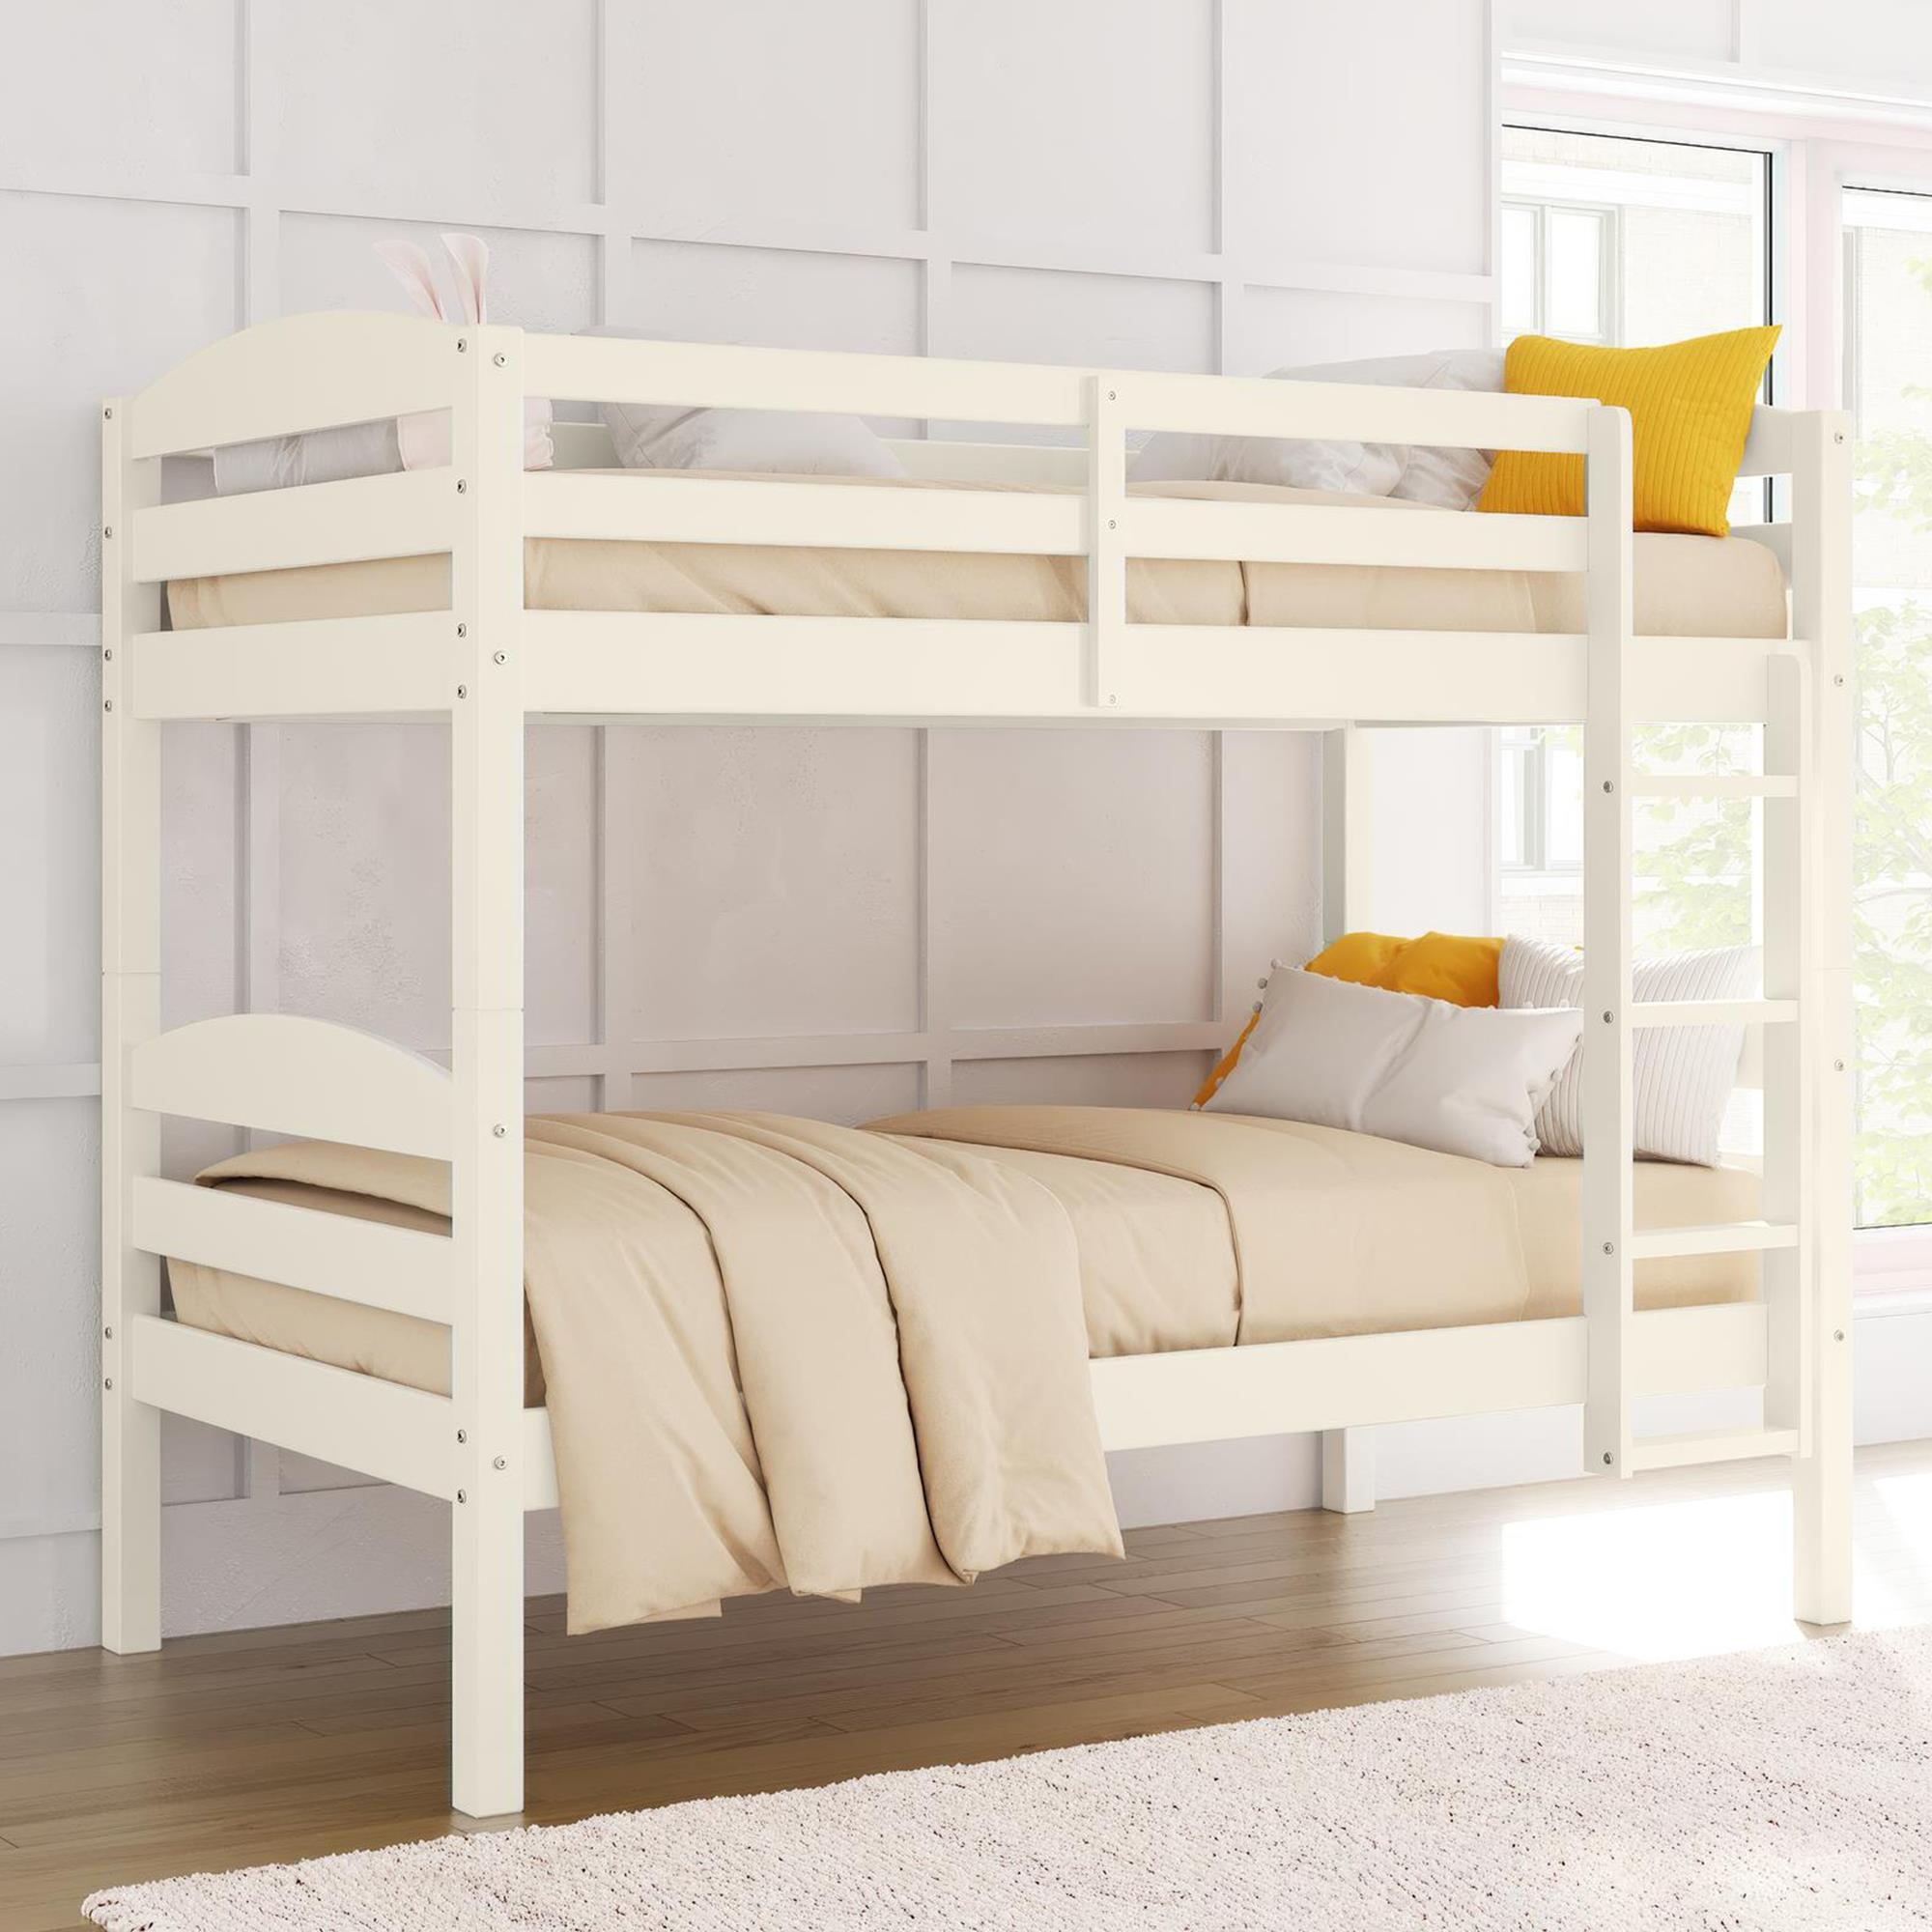 Better Homes & Gardens Leighton Solid Wood Twin-over-Twin Convertible Bunk Bed, White - image 1 of 24